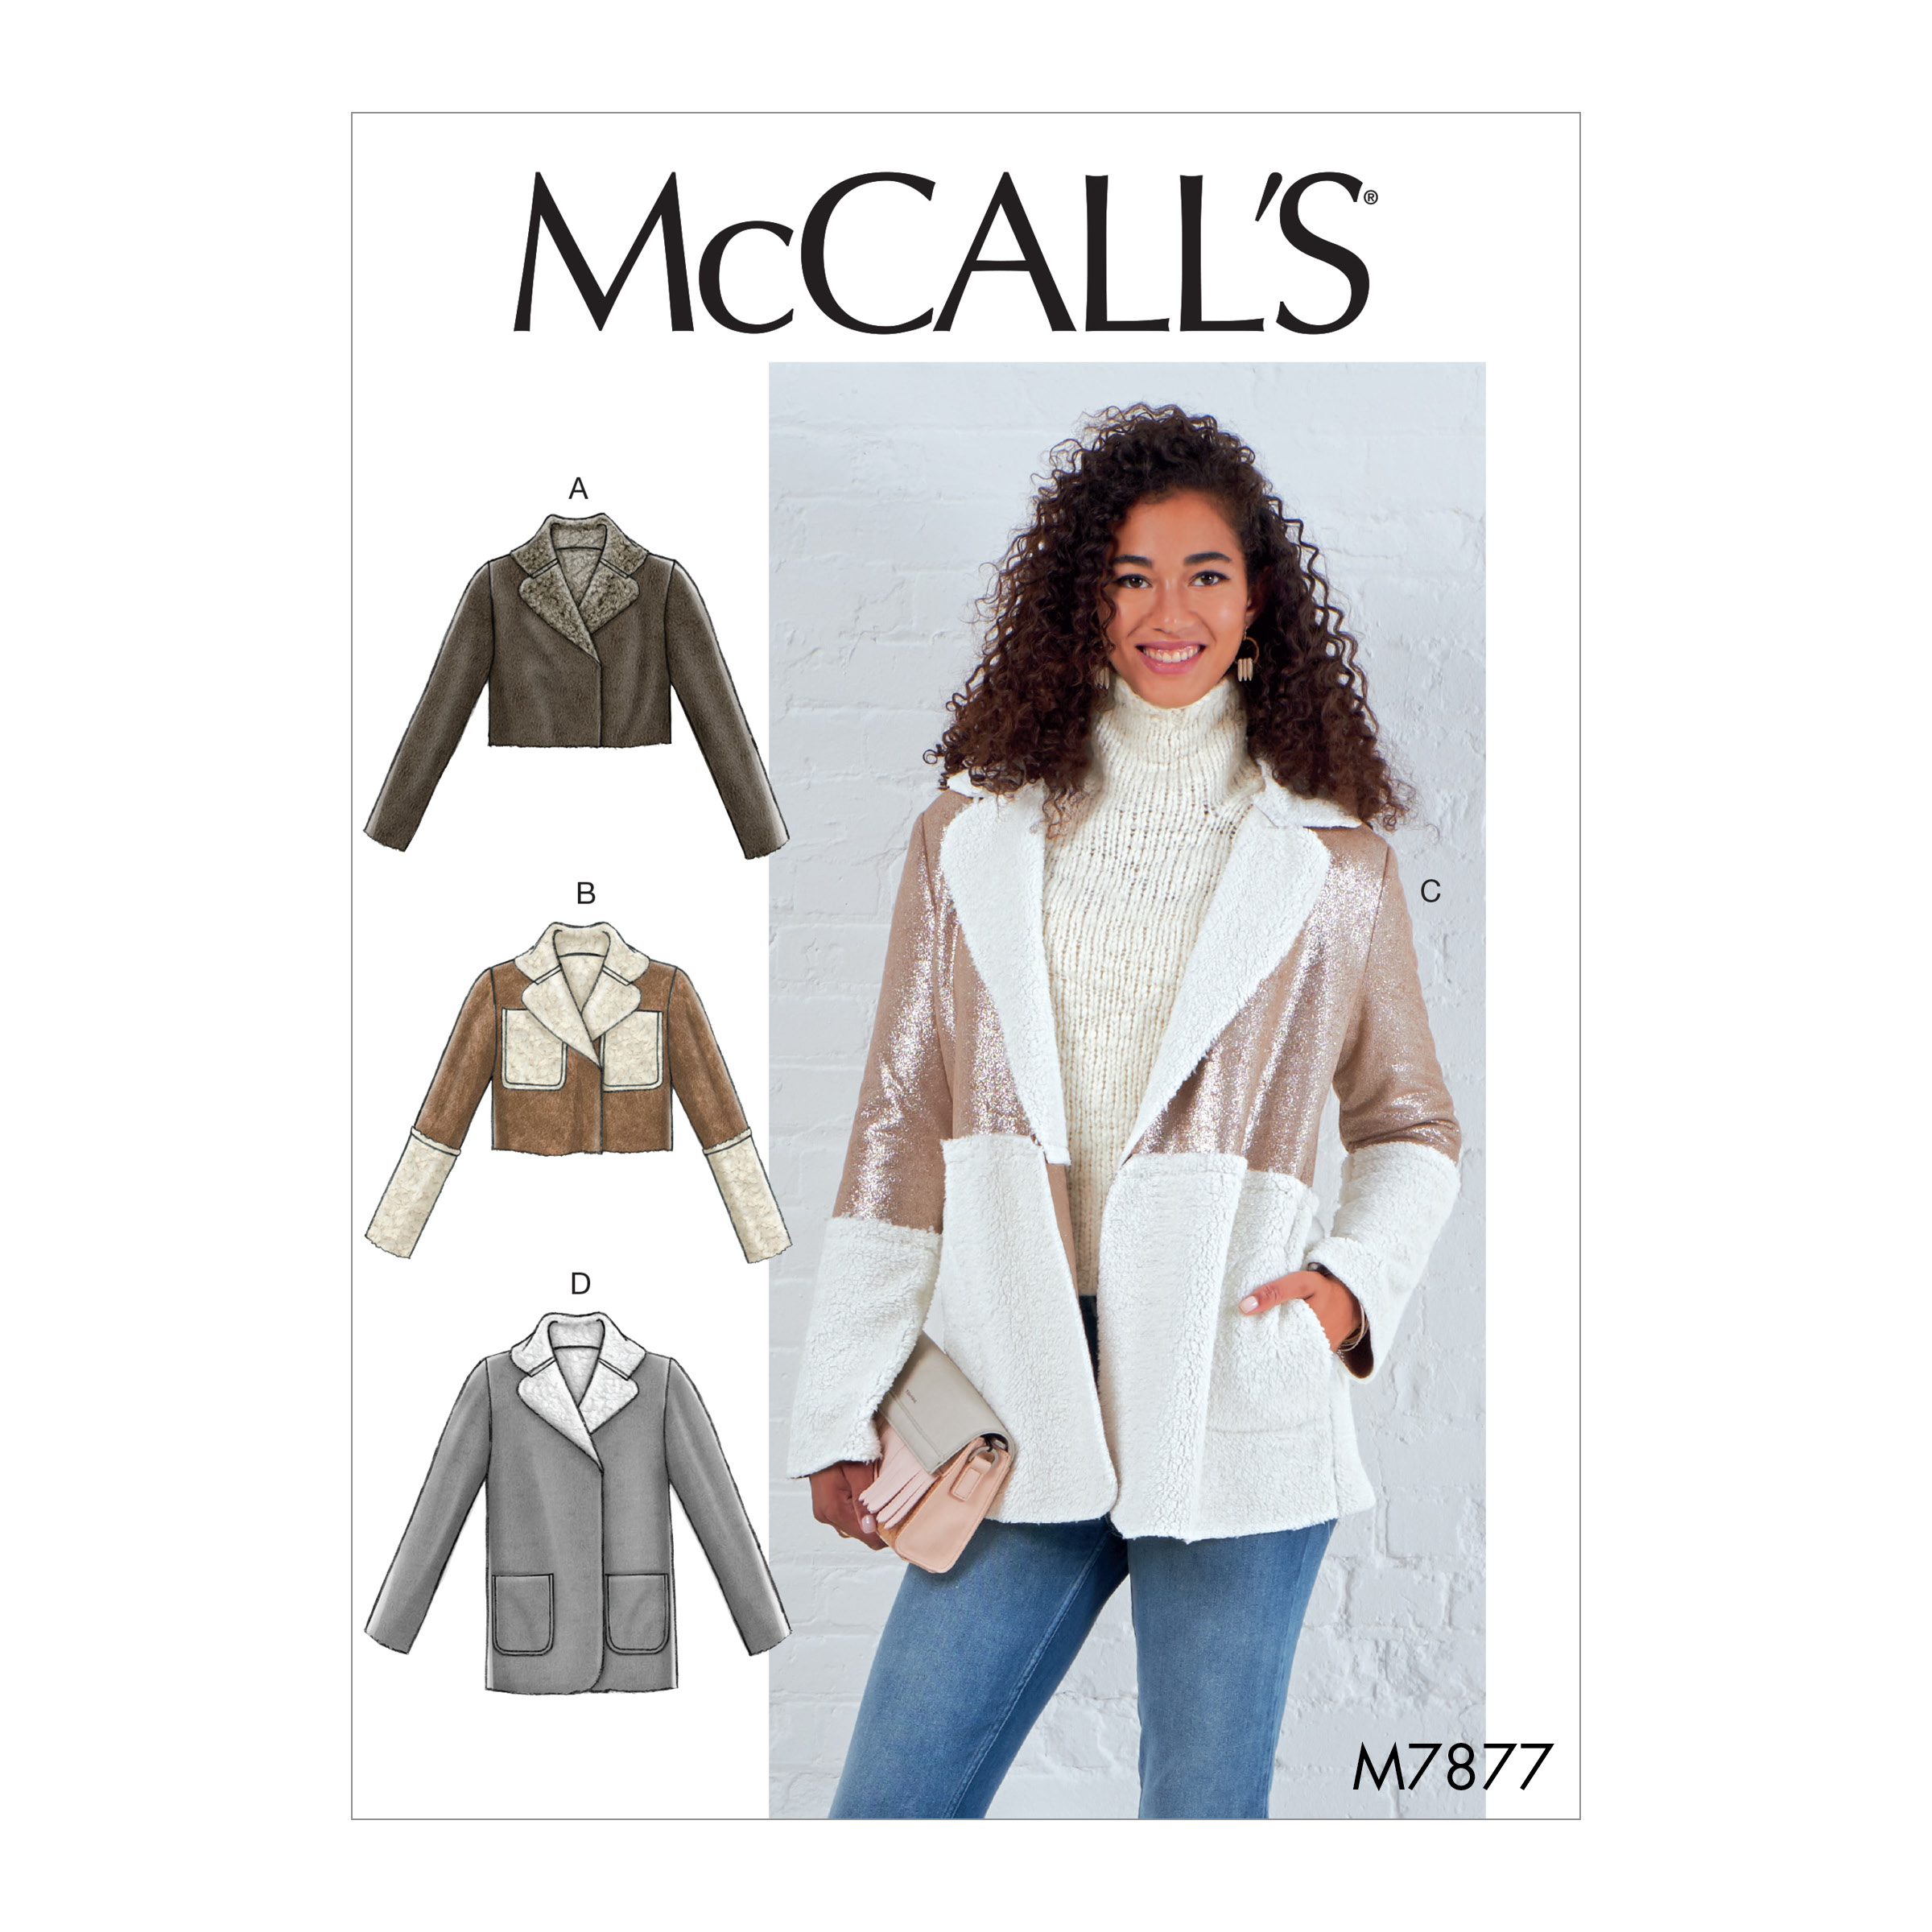 McCall's 7877 Misses' Jackets